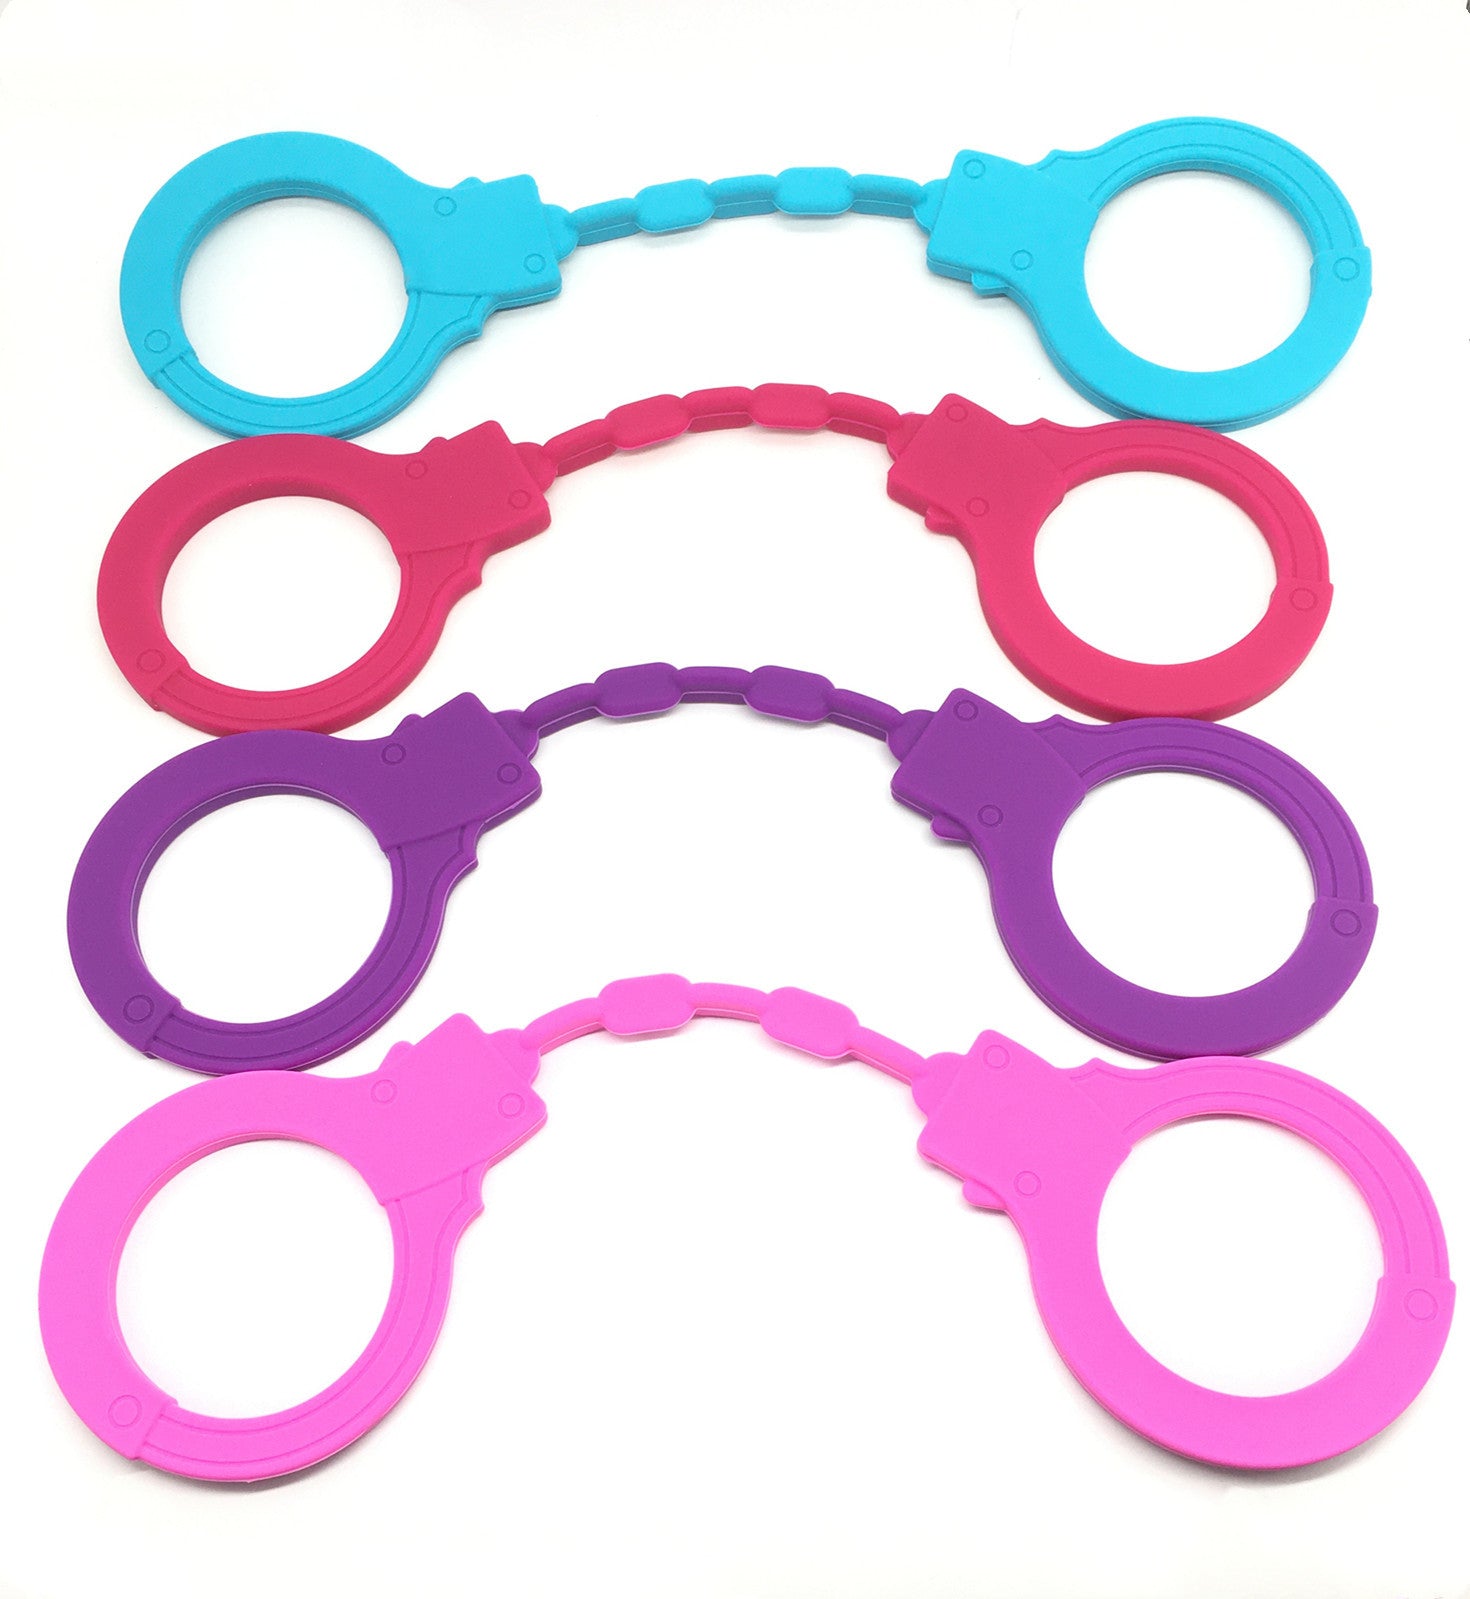 Silicone Restraint Cuffs: Safe, Comfortable, and Stylish Bestgspot